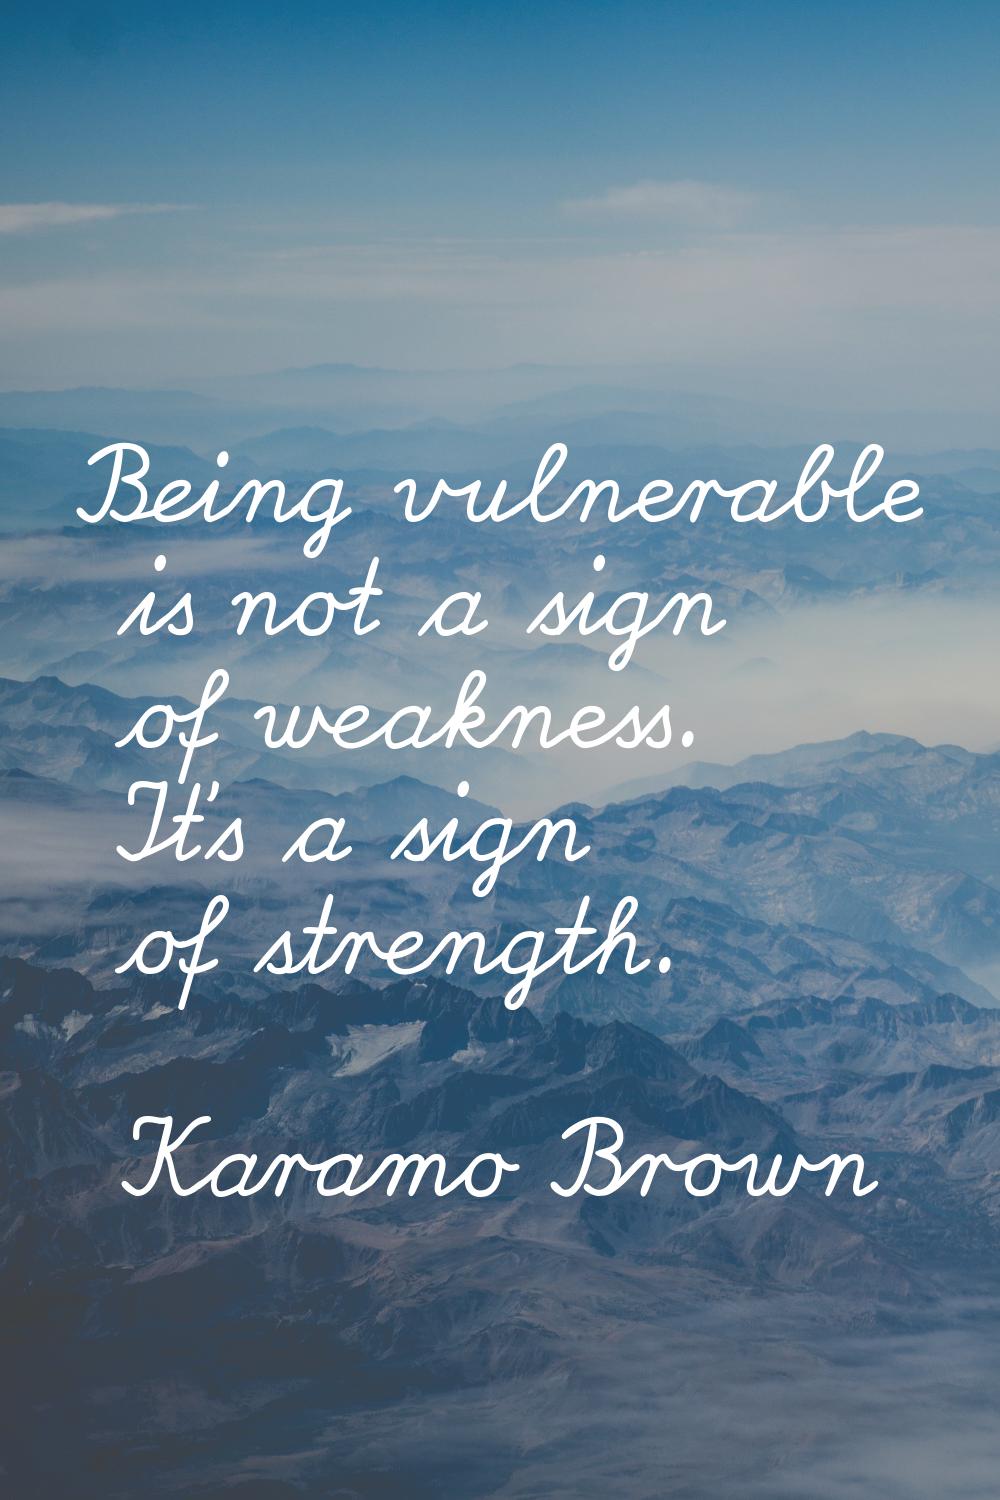 Being vulnerable is not a sign of weakness. It's a sign of strength.